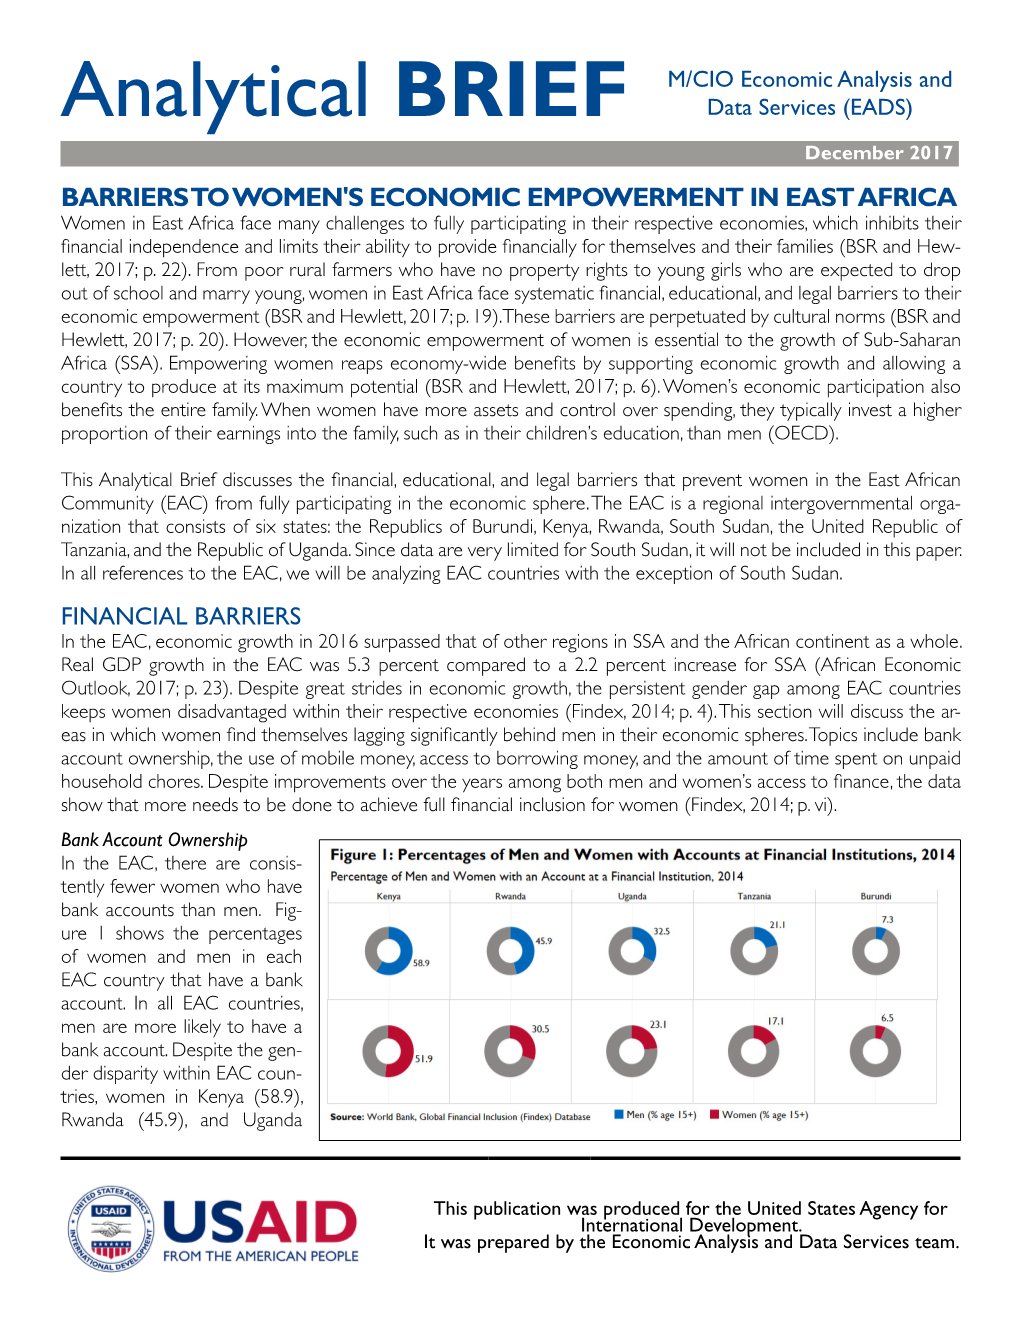 Analytical Brief on Barriers to Women's Economic Empowerment